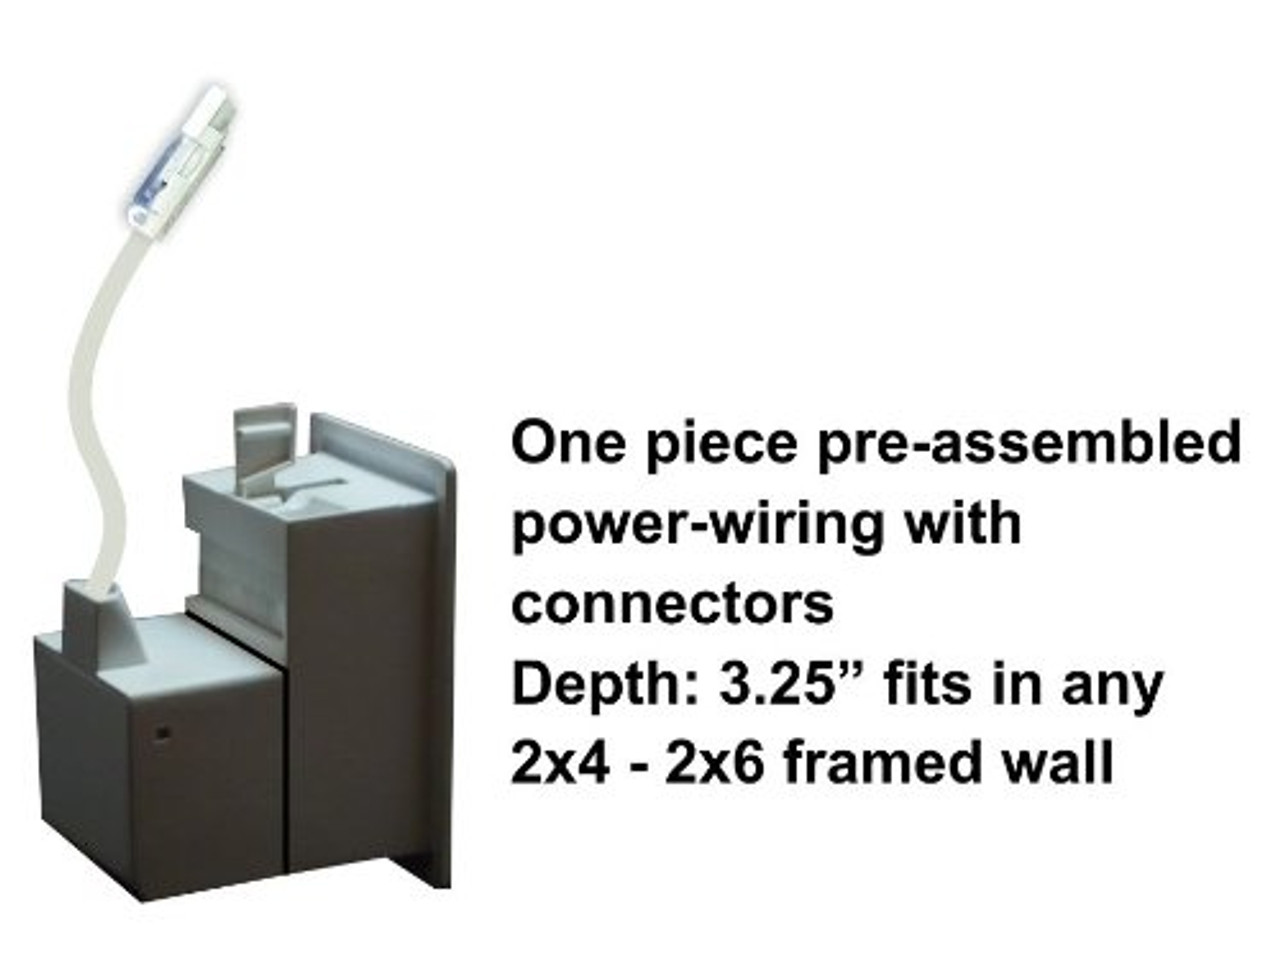 https://cdn11.bigcommerce.com/s-bd95c/images/stencil/1280x1280/products/2768/4283/PowerBridge_Solutions_TWO_CK_In_Wall_Cable_Management_System_with_PowerConnect_for_Wall_Mounted_TVs_one_piece__06469.1393634895.jpg?c=2?imbypass=on